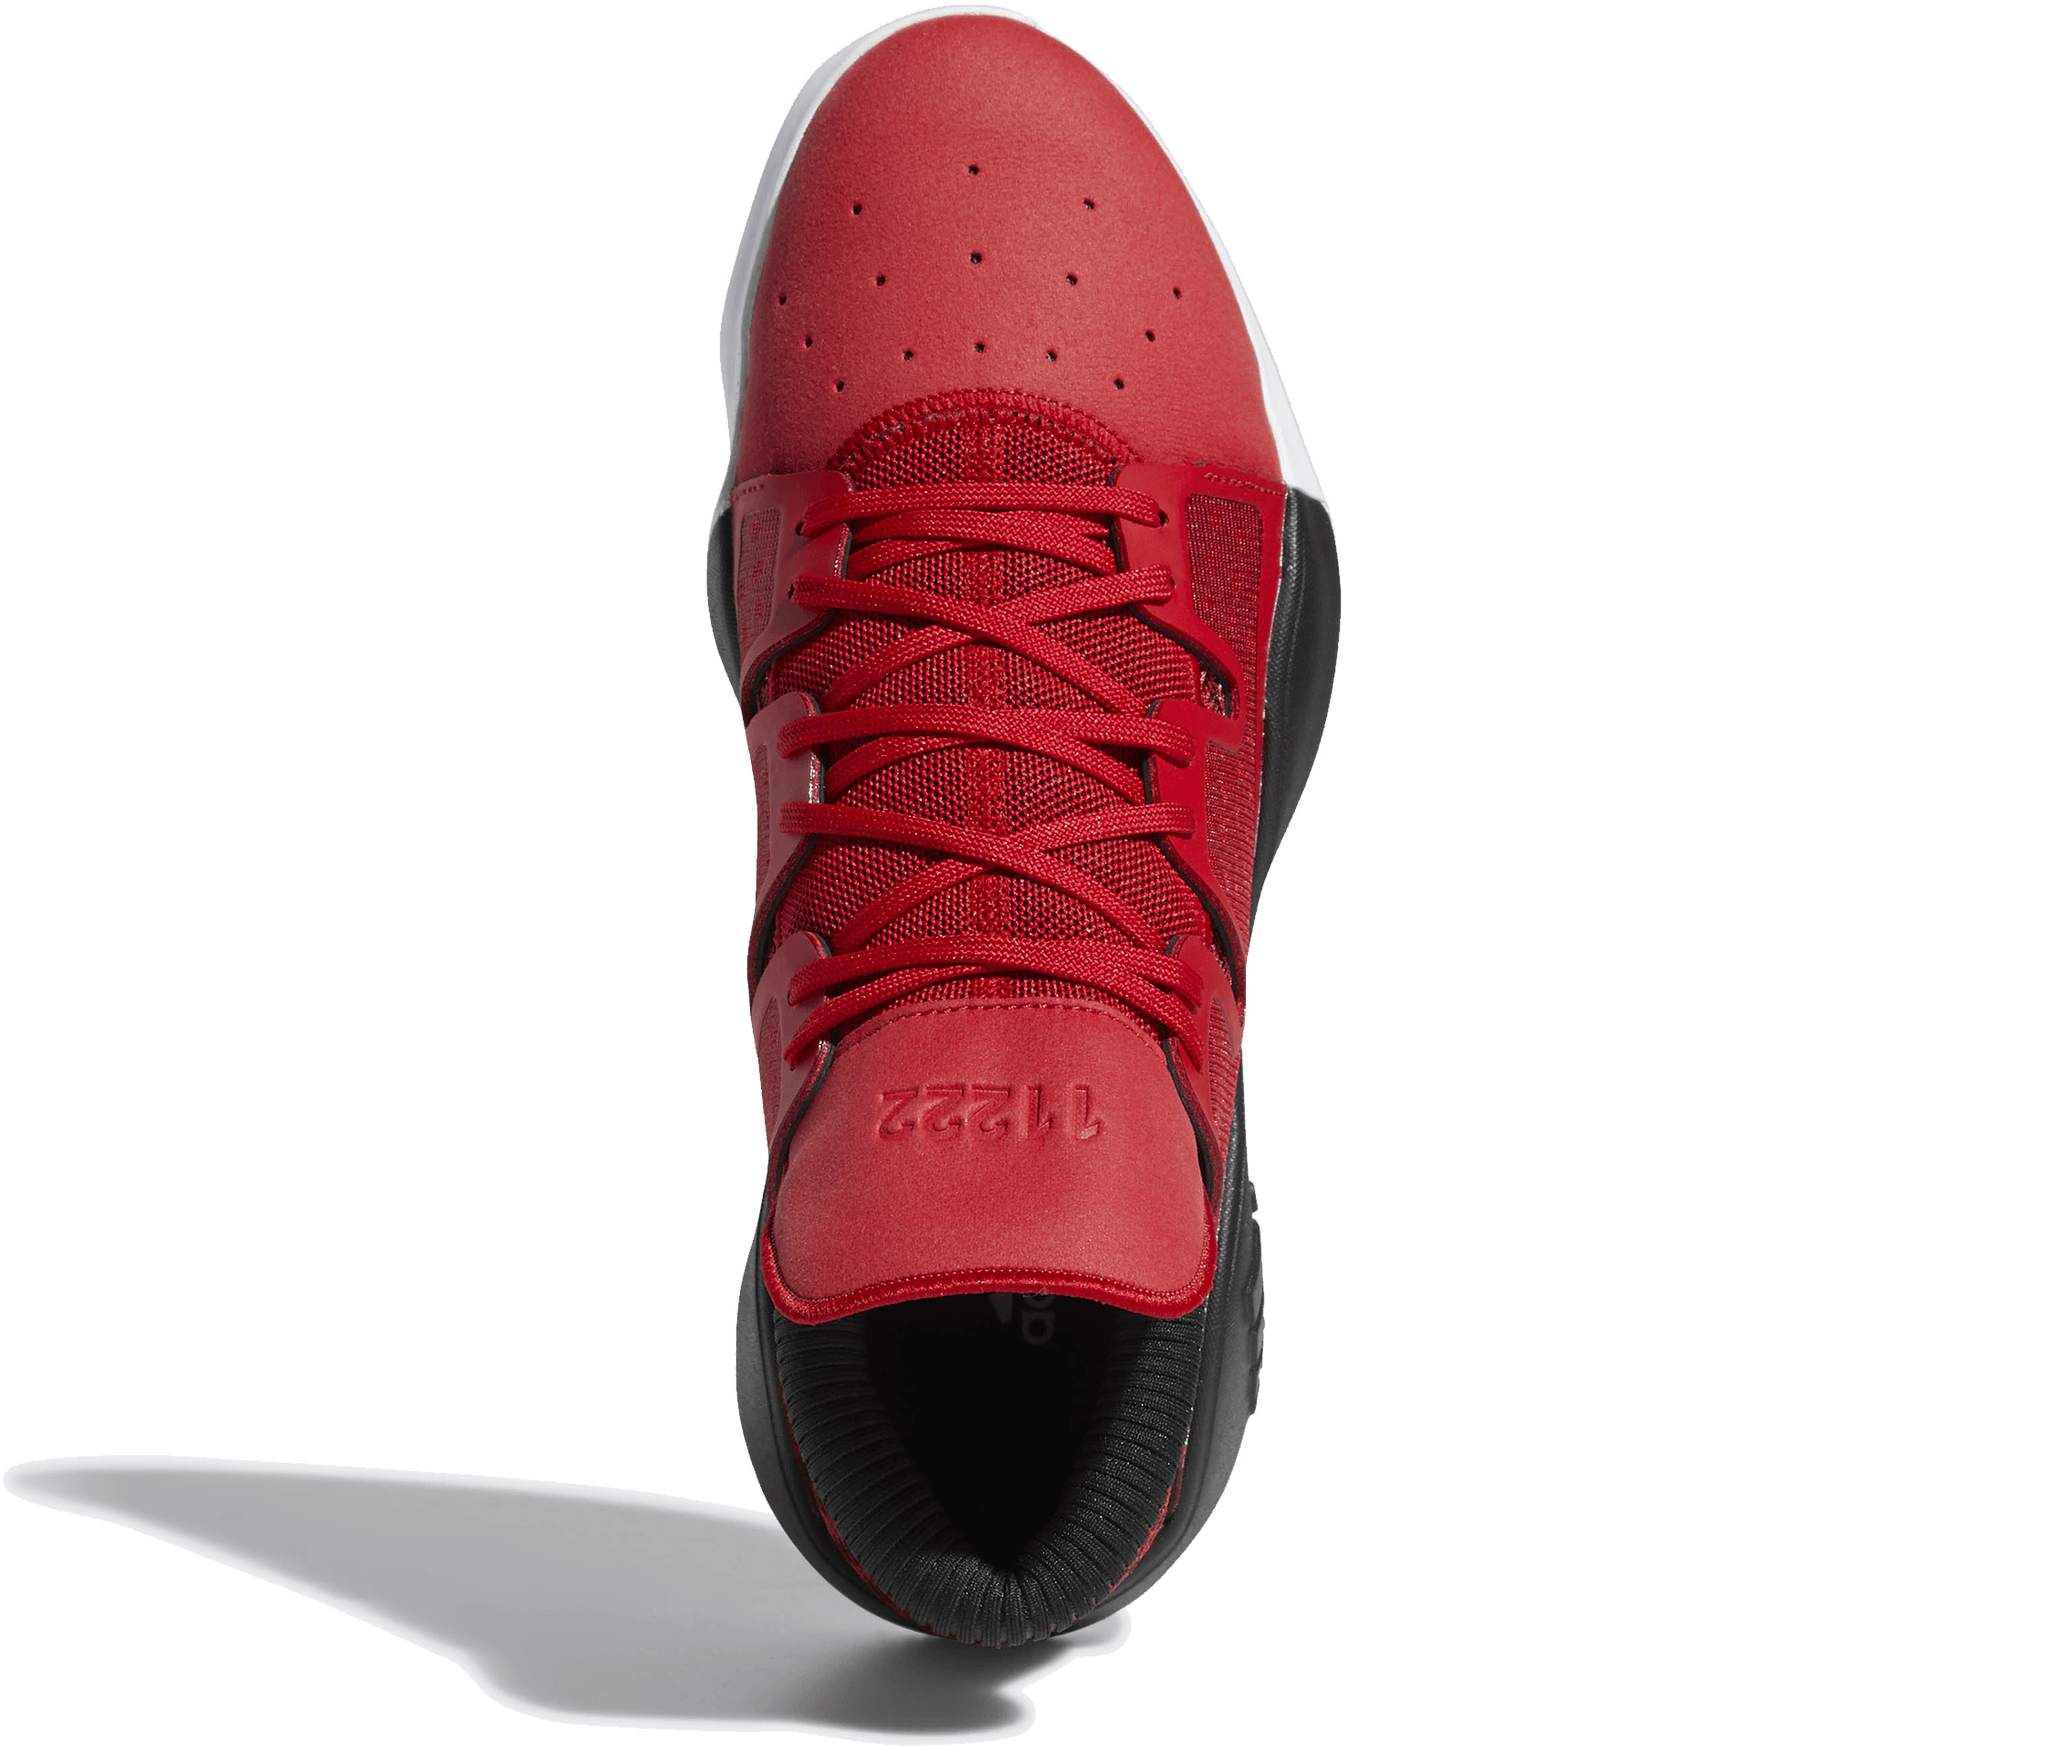 adidas pro vision red